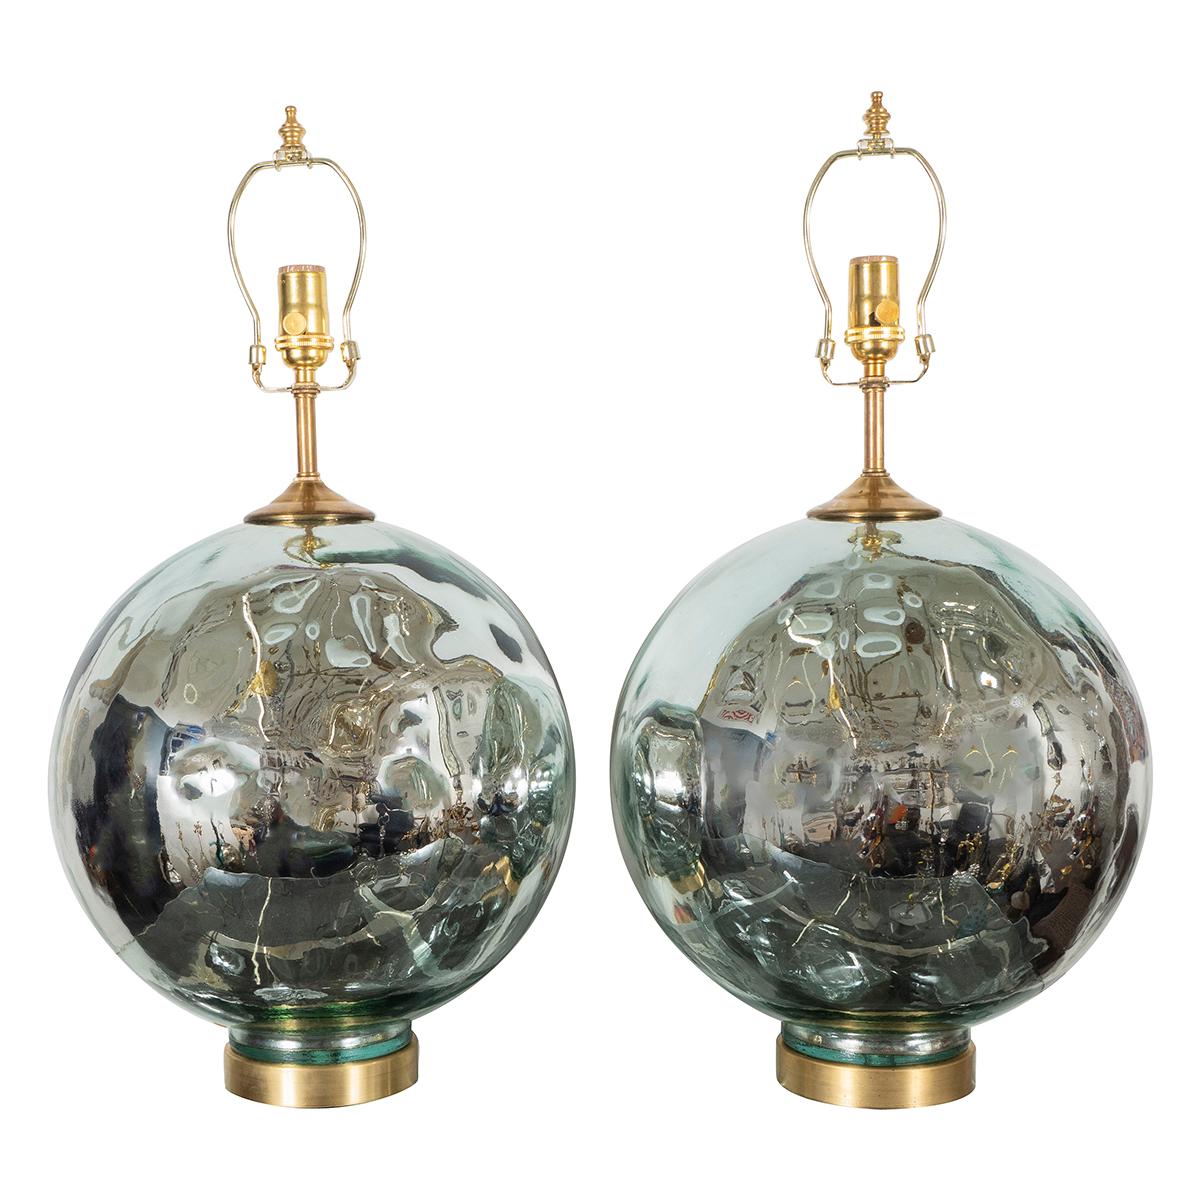 Pair of spherical mercury glass table lamps with blue tint.